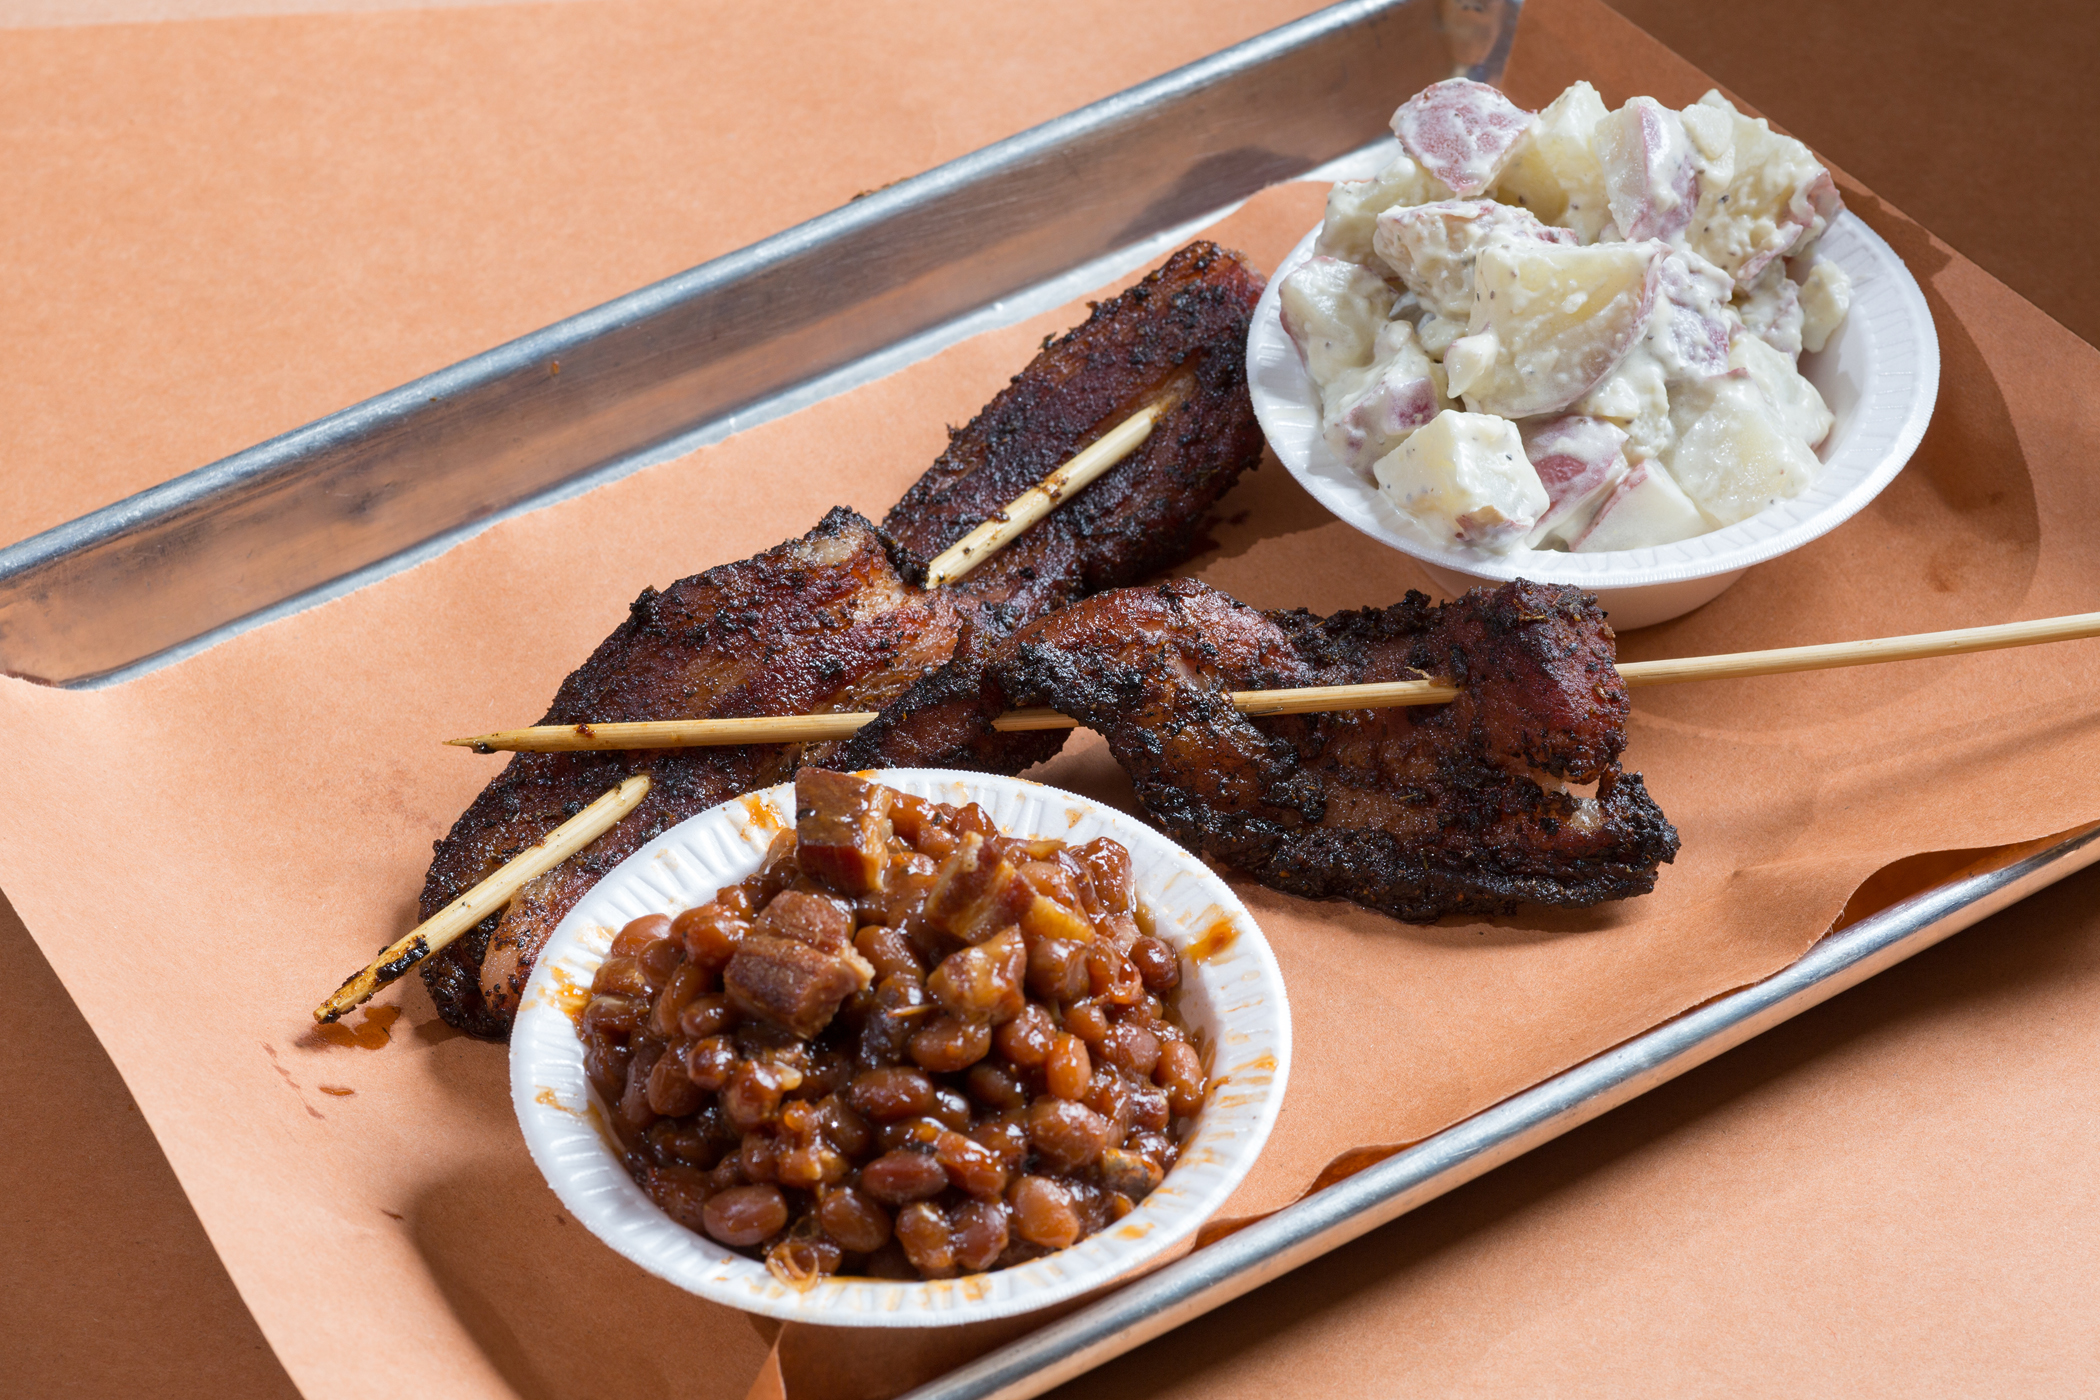 Monk's bacon on a stick with a side of baked beans and potato salad